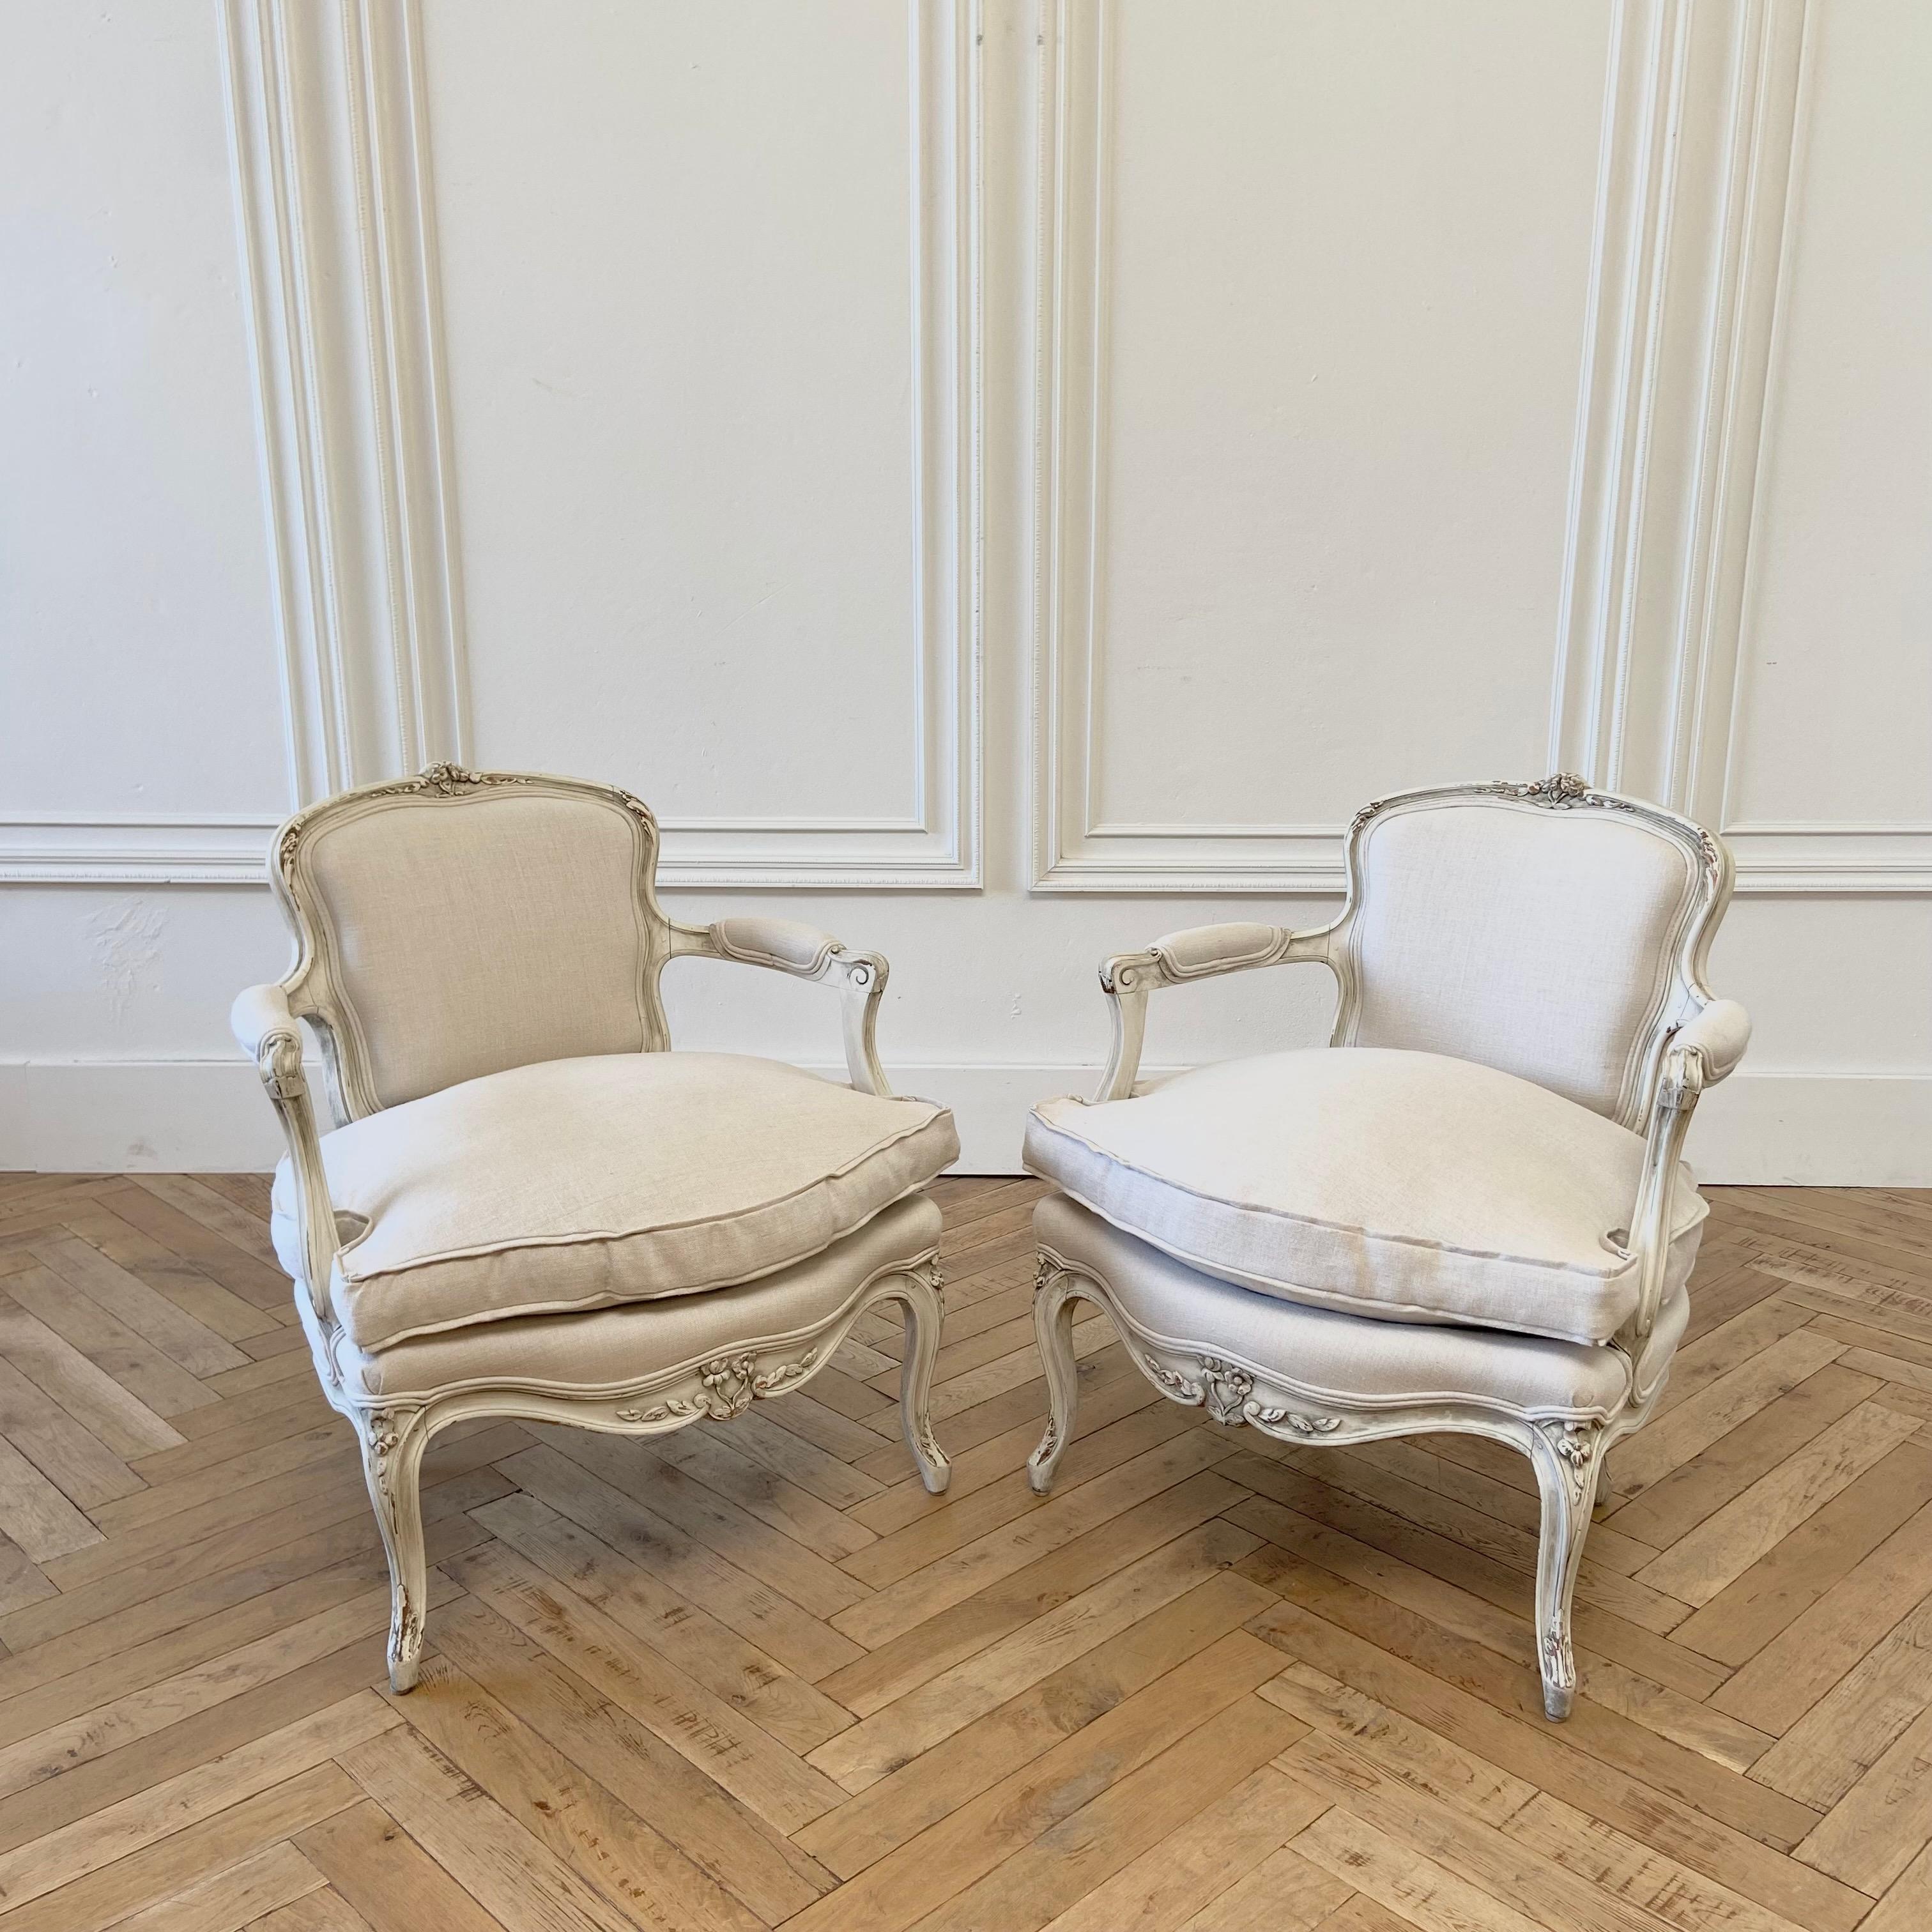 Pair of chairs 
This listing includes 2 antique Louis XV style open arm chairs.
Painted in our antique white finish, with subtle distressed edges, and antique glazed patina.
We have reupholstered these in Libeco Natural Linen. The seats have a